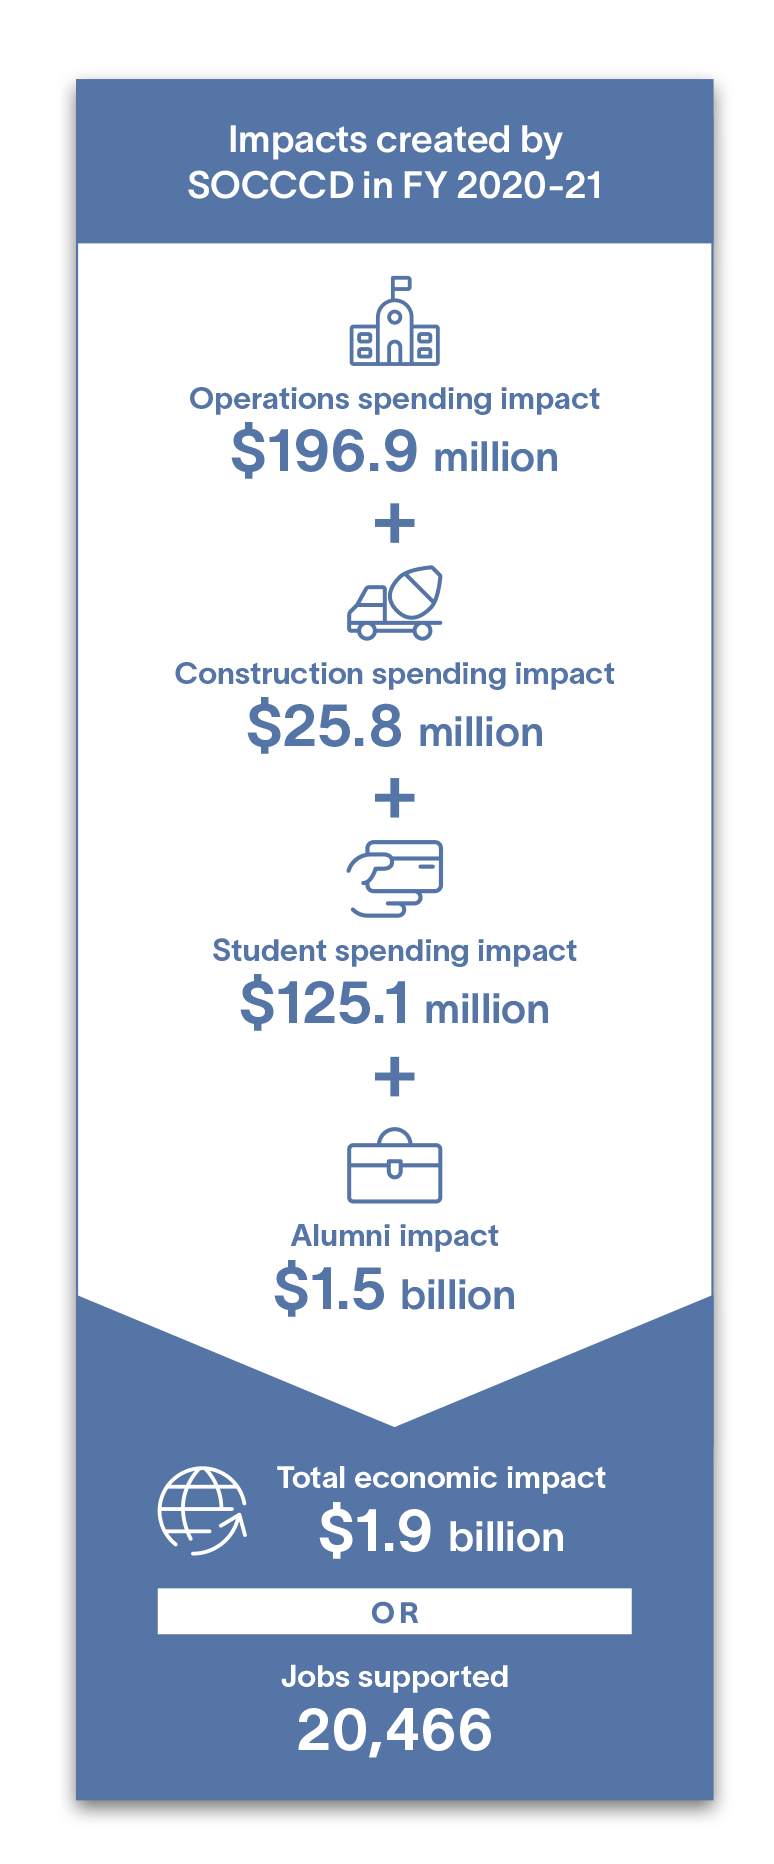 impacts created by SOCCCD in FY2020-21, operations spending impact $196.9m + construction spending impact $25.8m + student spending impact $125.1m + alumni impact $1.5b = total economic impact $1.9b or 20,466 jobs supported